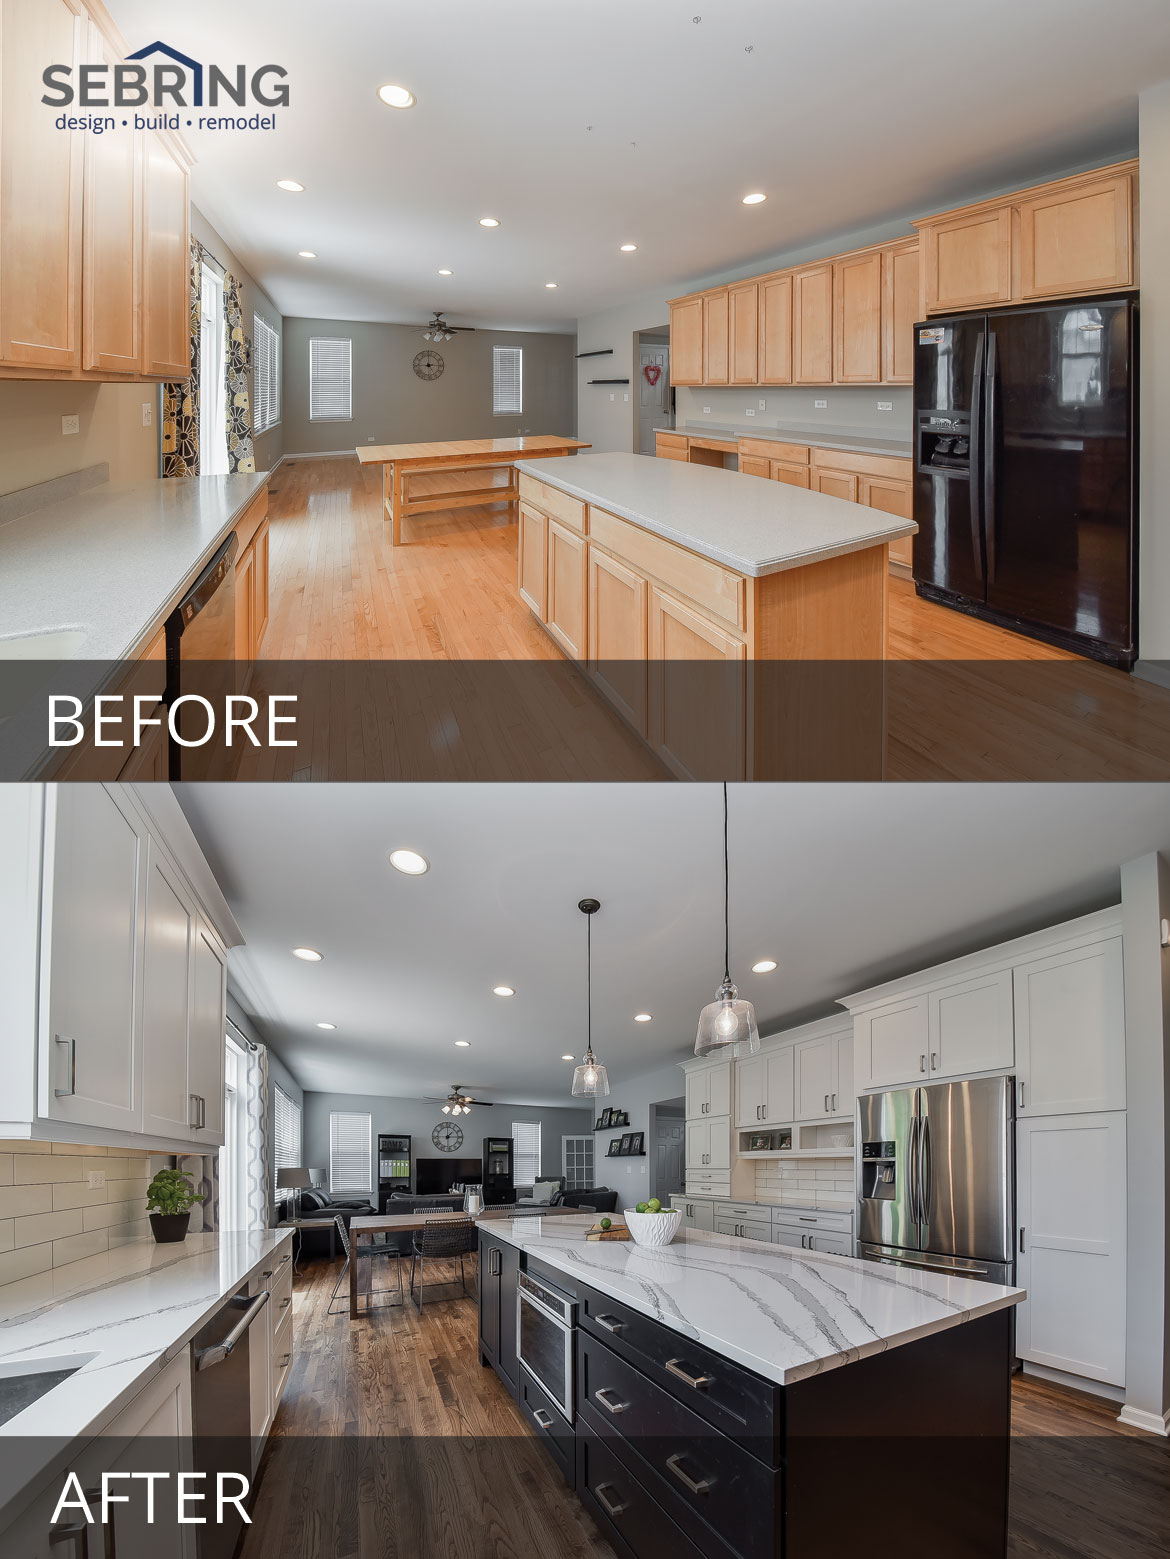 Perhaps the best 20 Before And After Kitchen Remodels – homeicon.info